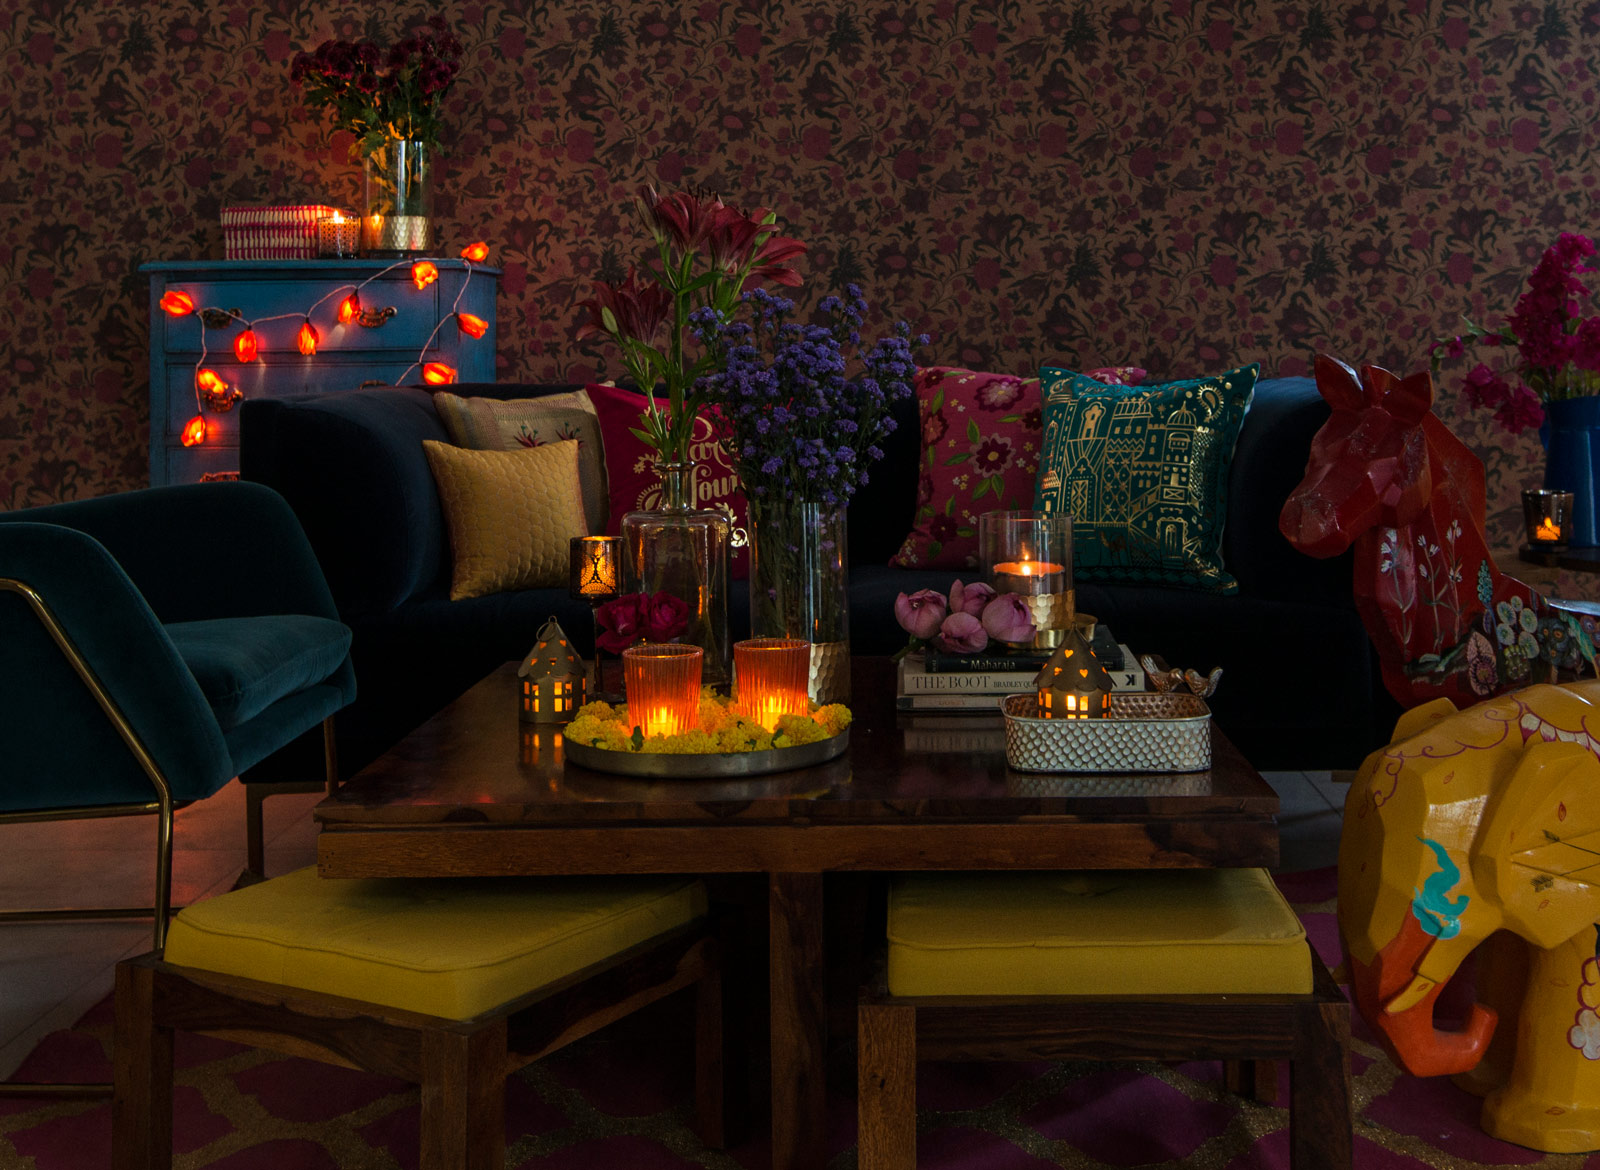 Colourful Living Room Ideas with Foil Prints on Cushions & Floral Lights - Beautiful Homes